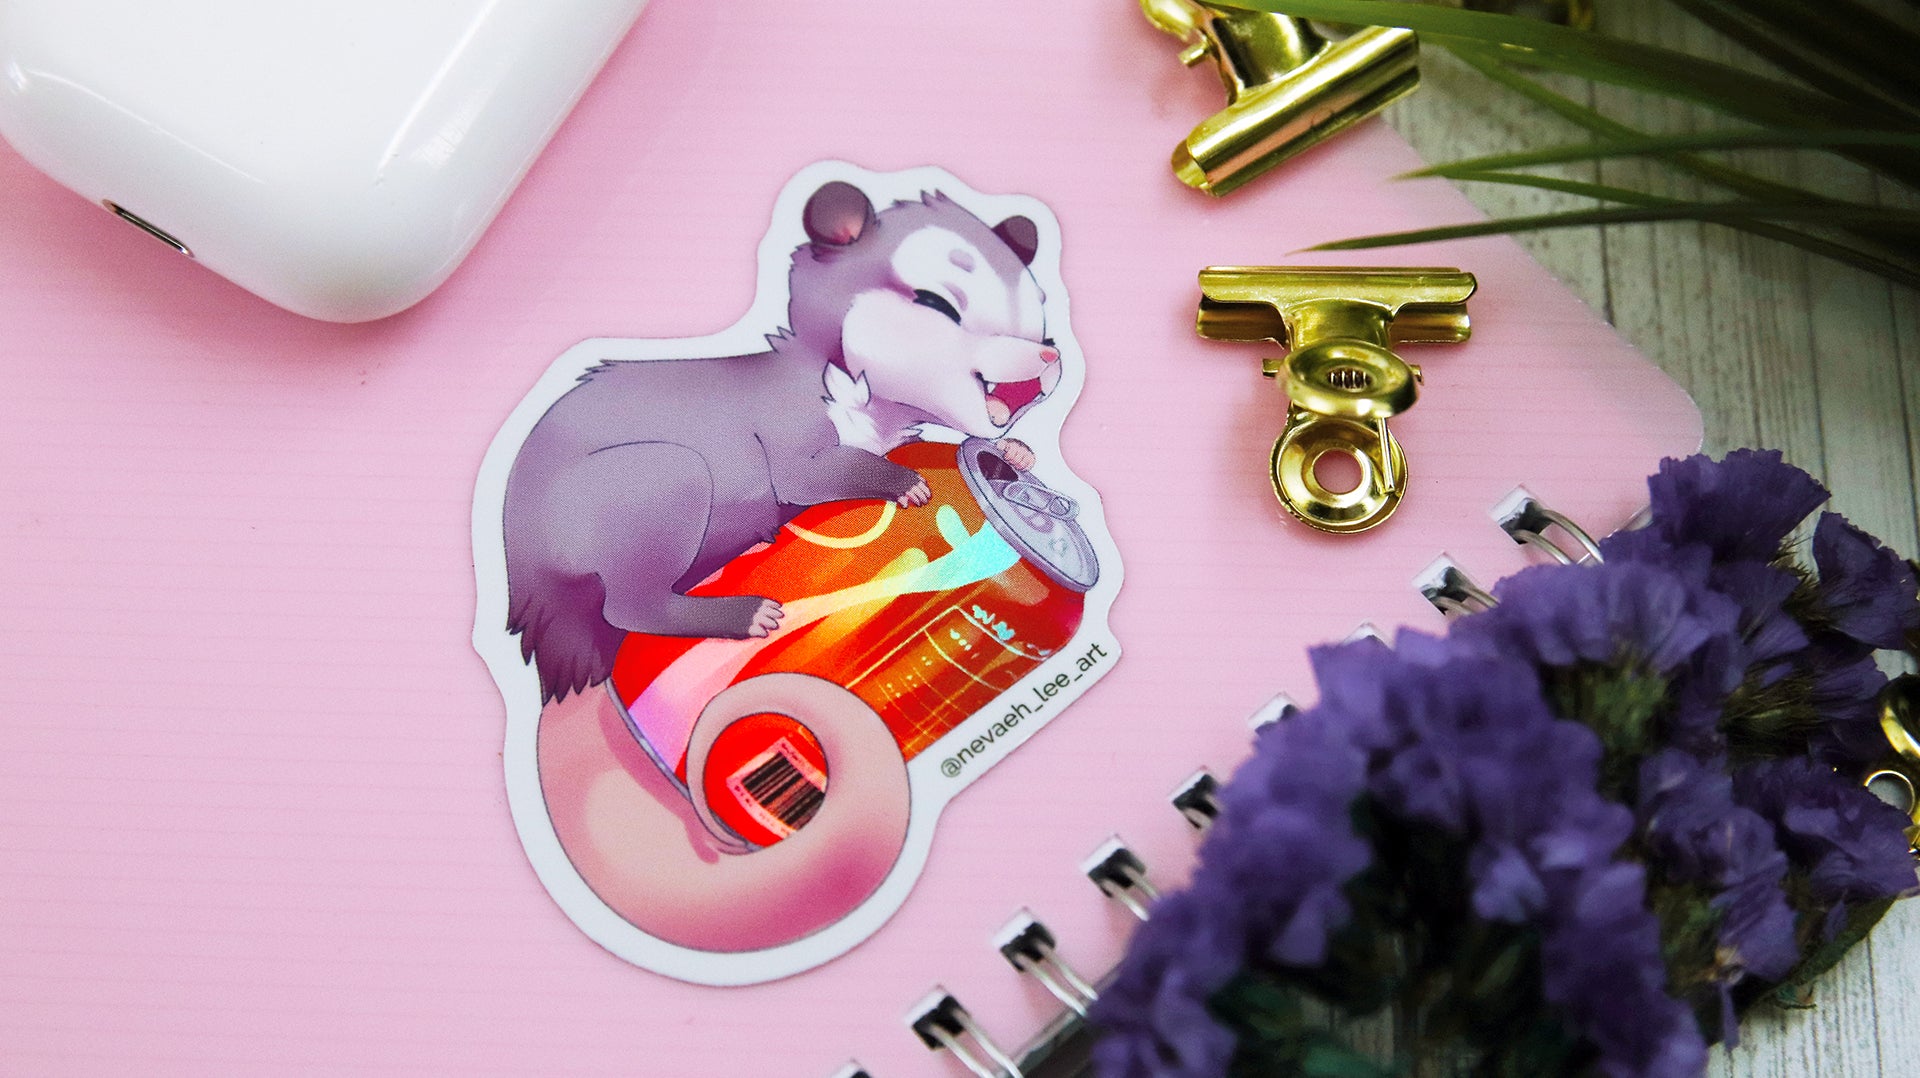 https://stickerit.co/cdn/shop/files/holographic-vinyl-sticker-with-cute-rat-holding-a-coca-cola-can-applied-to-a-pink-notebook.jpg?v=1682767303&width=1946